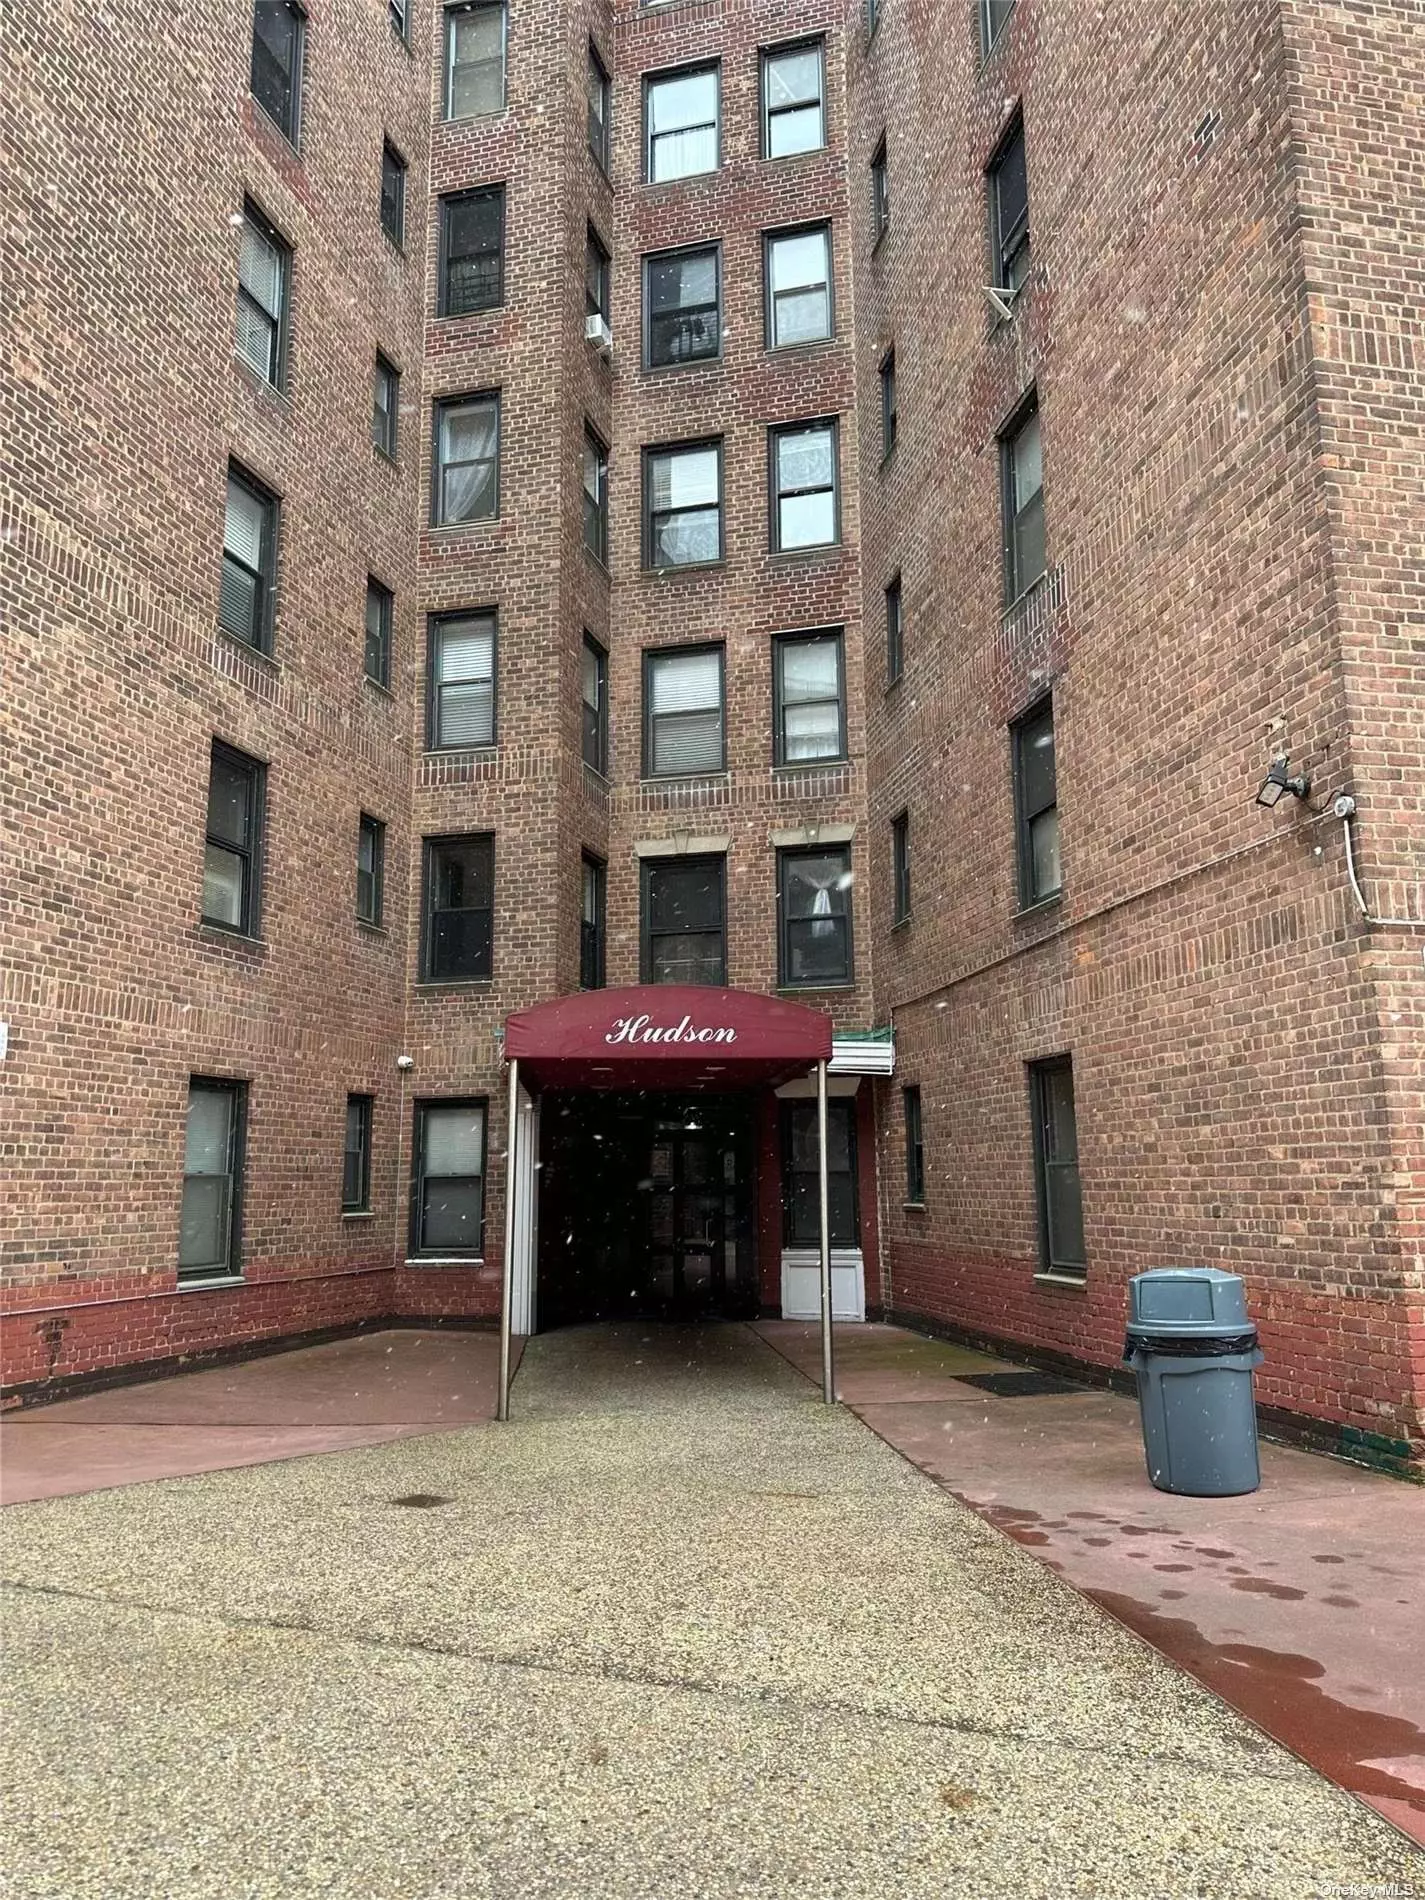 Great opportunity to make this 2 Bedroom, 1 bath, newly painted corner unit in Section 3 of the Forest Park Cooperative your dream home. Located on the second floor of the Hudson Building, this spacious floor plan offers great potential. Hard floors throughout, plenty of closet space, 2 large sized bedrooms, one of which has double exposure. Waiting to be re-imagined and customized. Close to shopping, schools, and transportation.